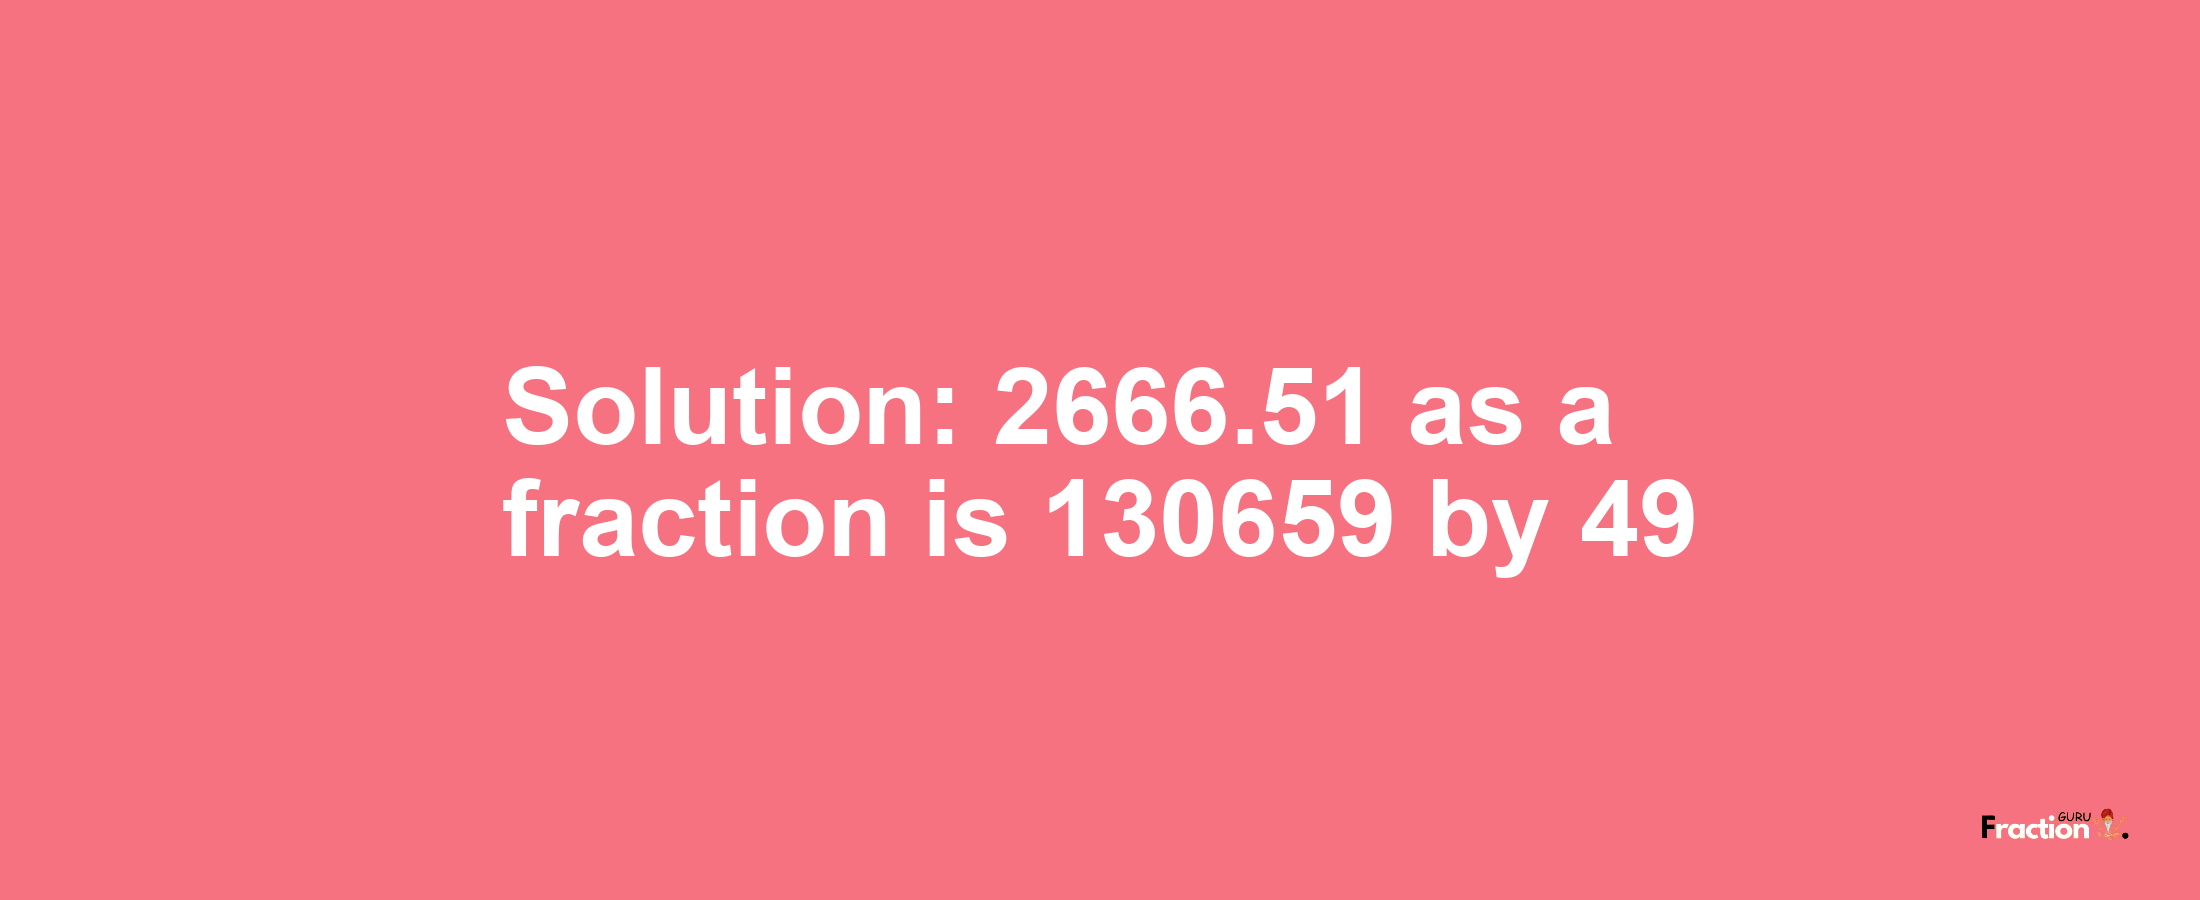 Solution:2666.51 as a fraction is 130659/49